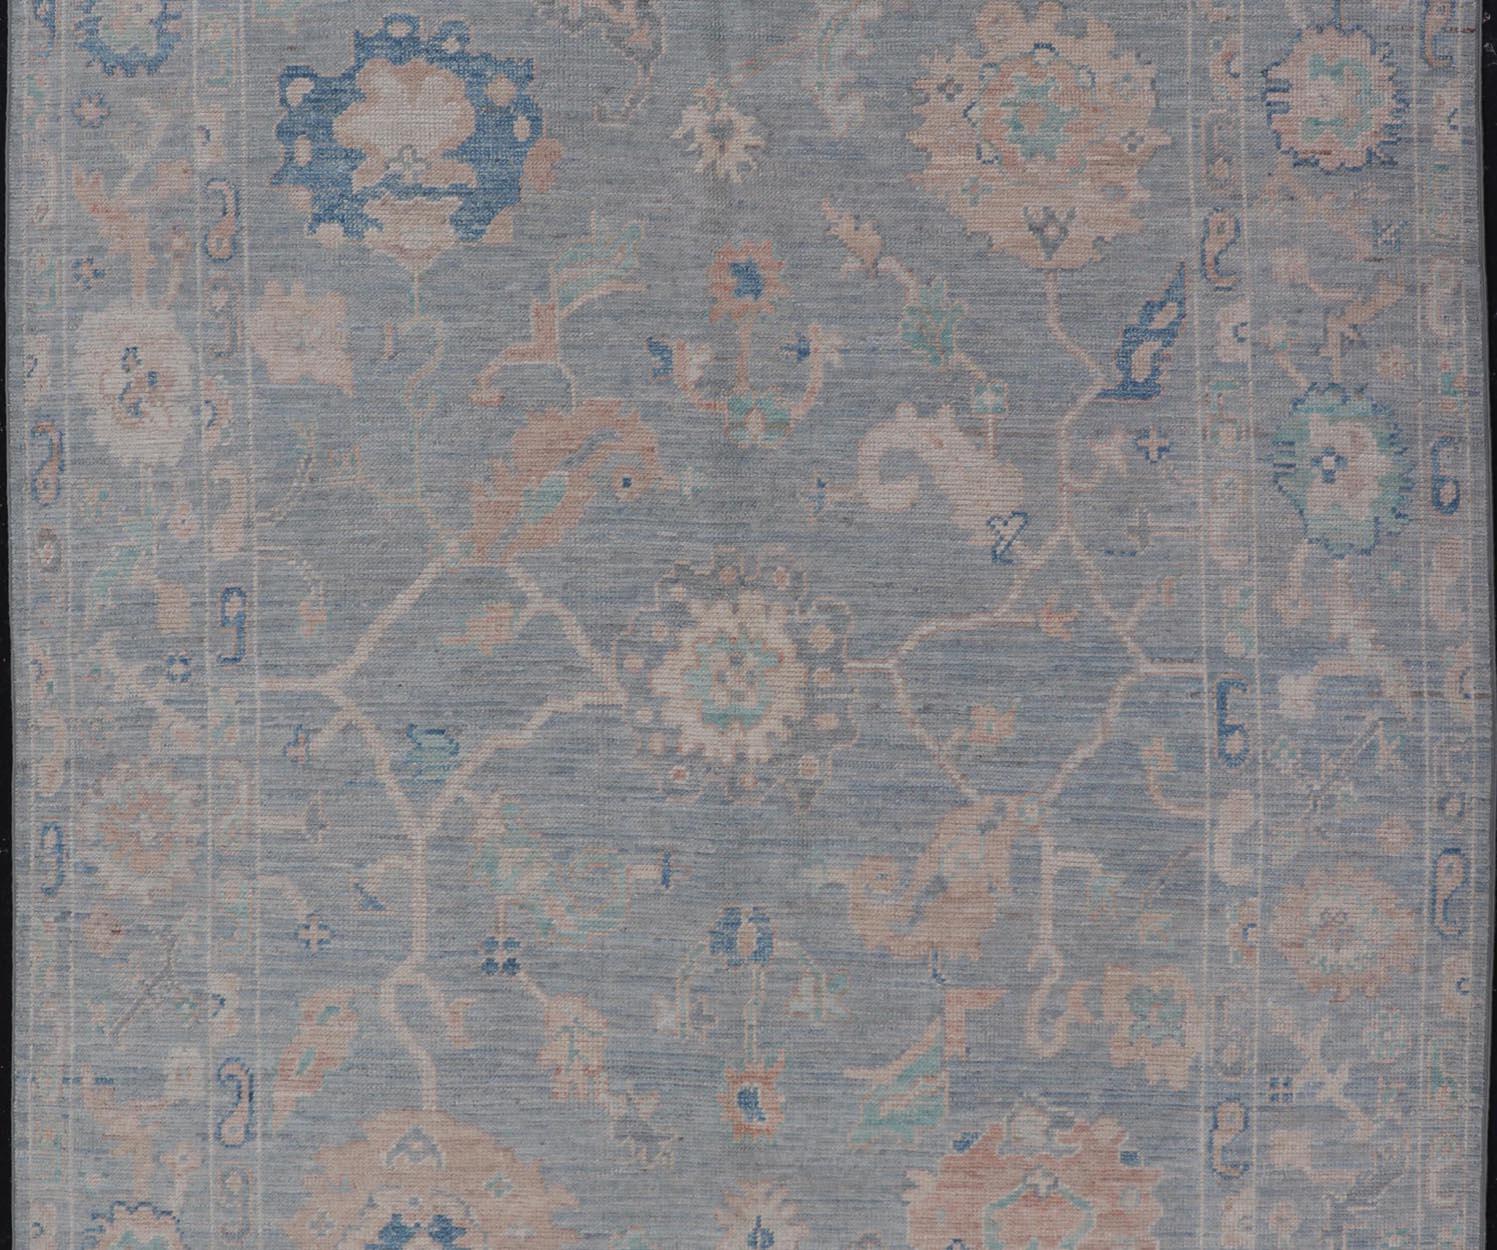 Modern Oushak Rug With in Light Gray Blue Background and All-Over Floral Motifs. Keivan Woven Arts; rug AWR-8052 Country of Origin: Afghanistan Type: Oushak Design: All-Over, Floral 
Measures: 5'11 x 9'1 
Hand-Knotted in Afghanistan, this antique